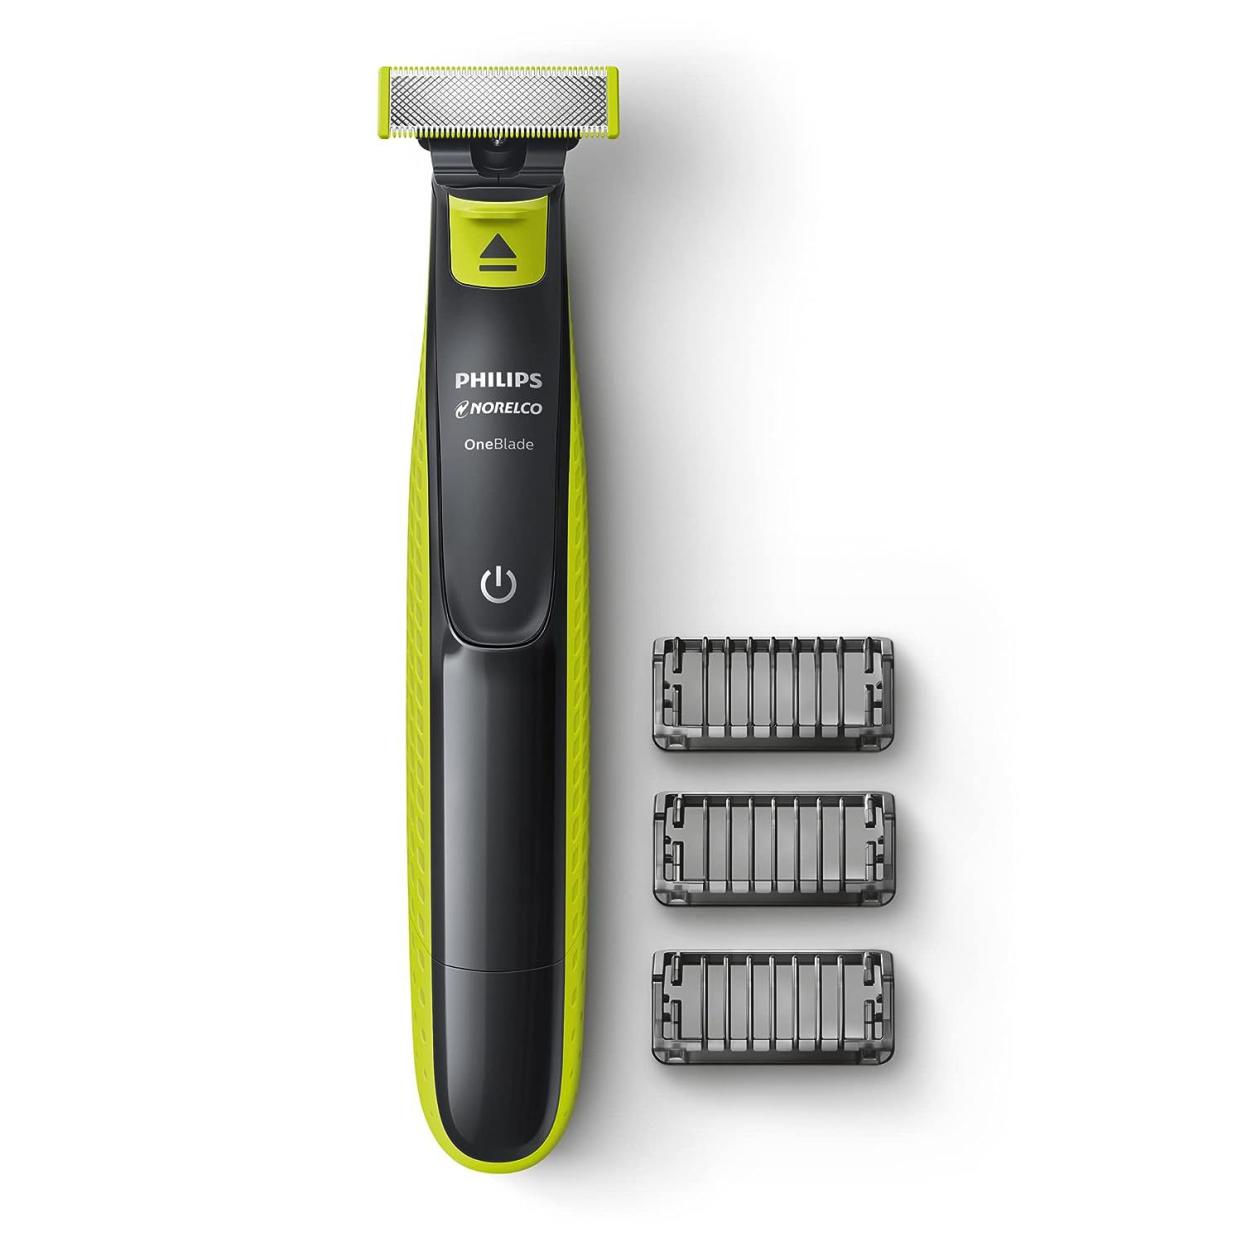 Philips Norelco OneBlade Hybrid Electric Trimmer and Shaver QP2520/90